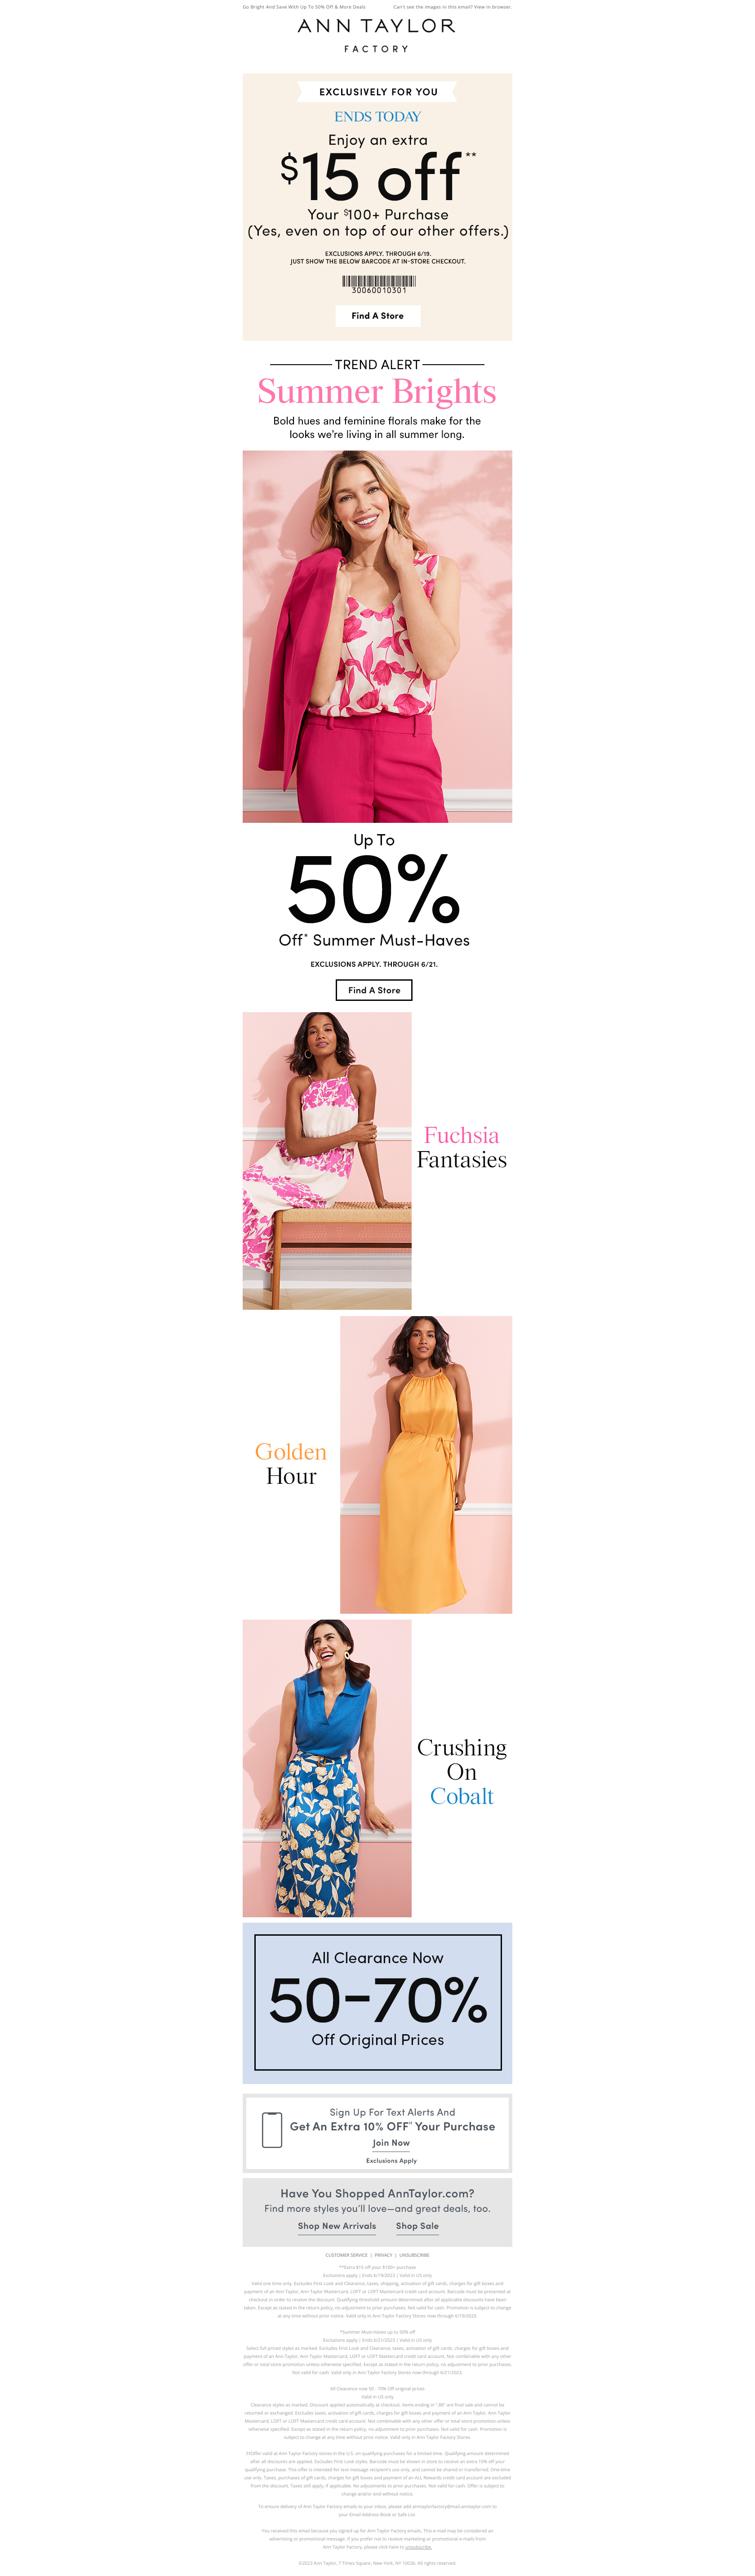 Brighten Up Your Look With These Bold Hues - Ann Taylor Factory Newsletter